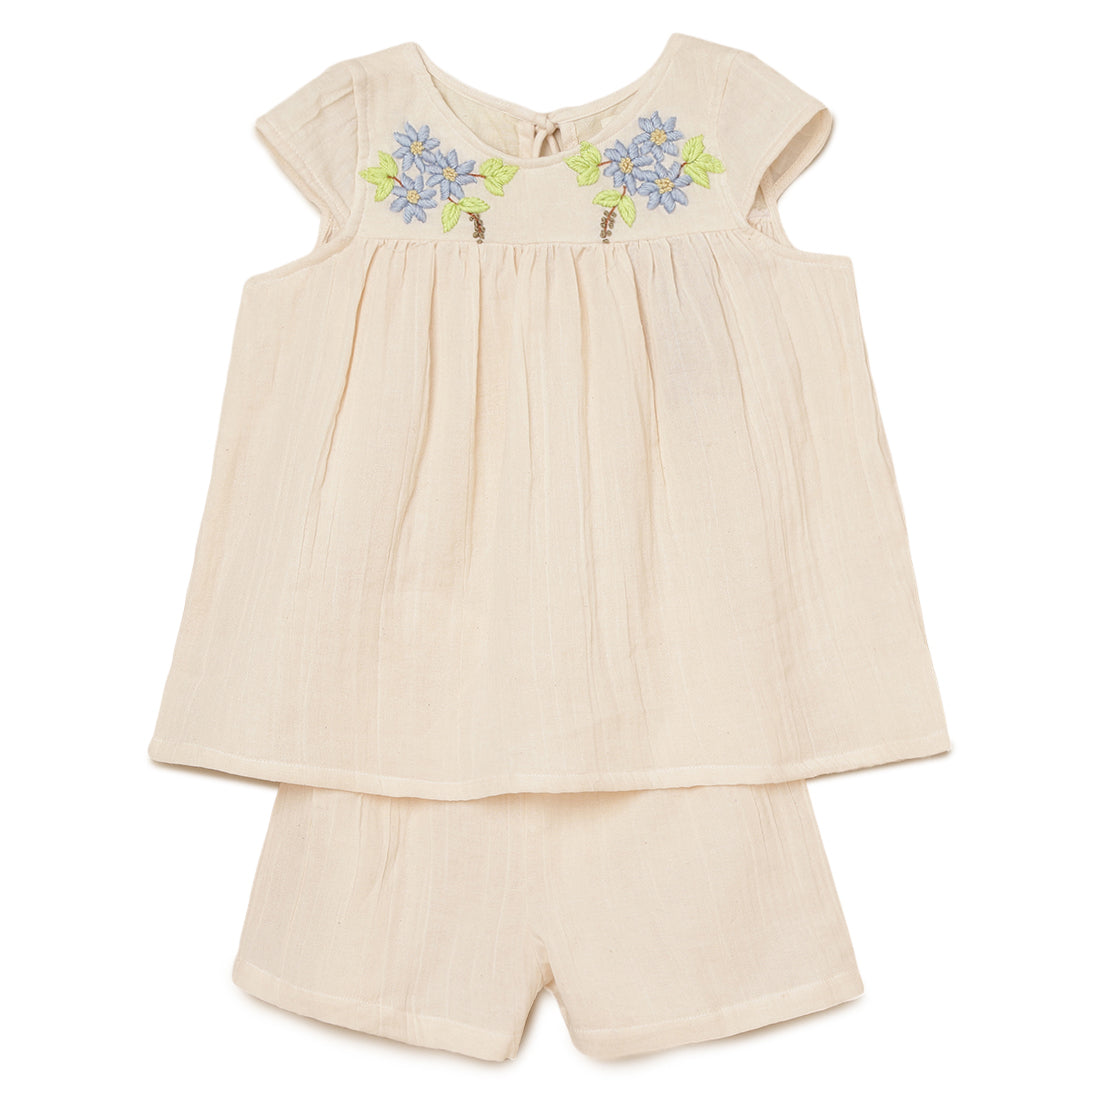 Girls Embroidered Top and Short Set - Full set